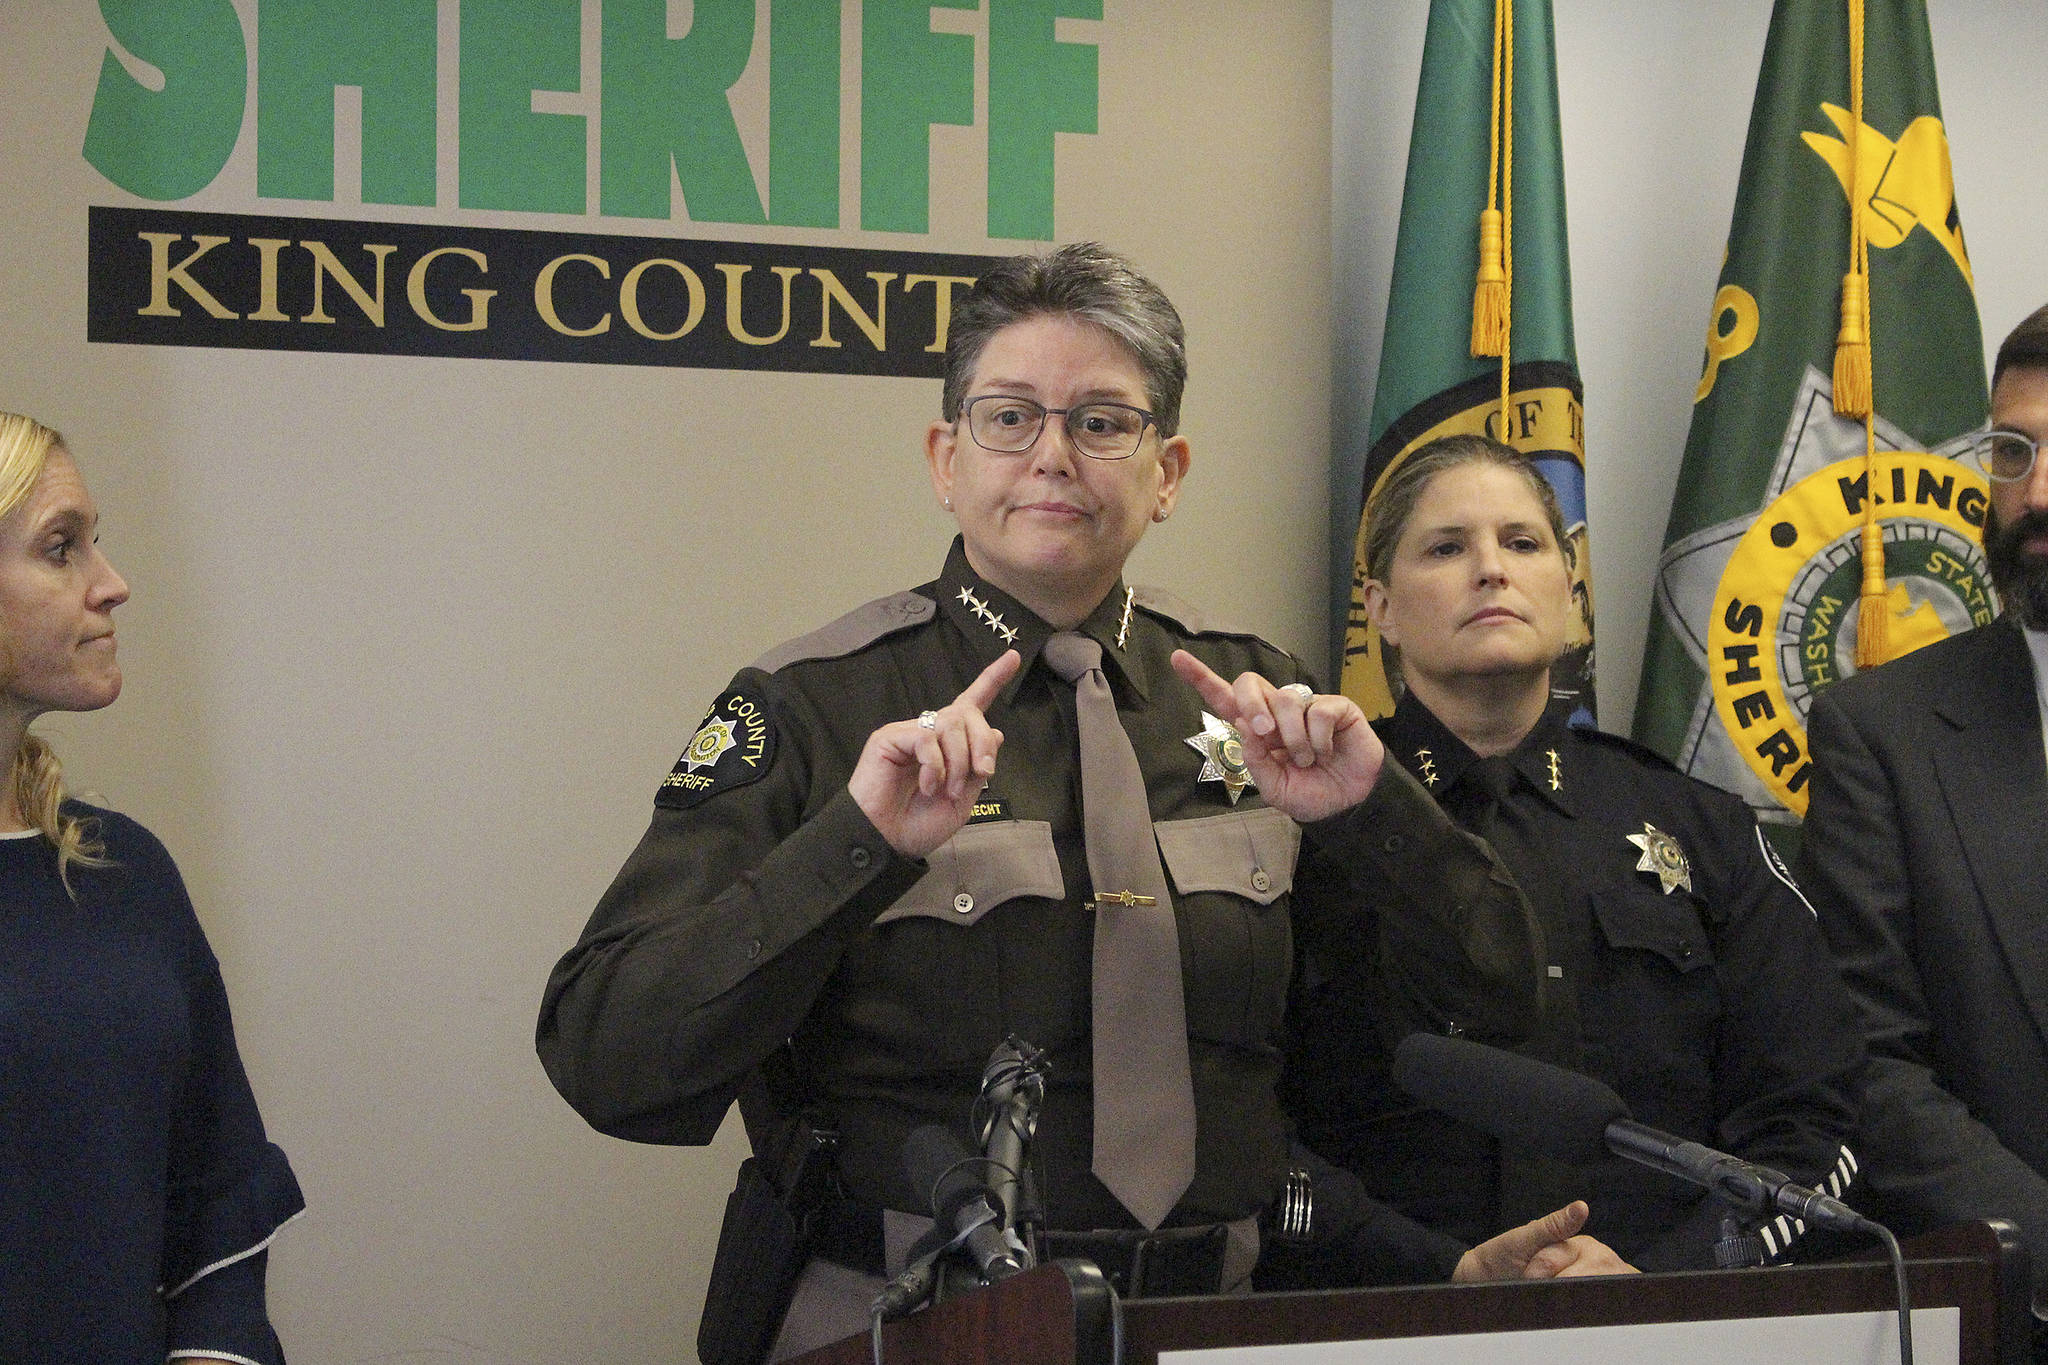 Charter review could overhaul King County Sheriff’s Office